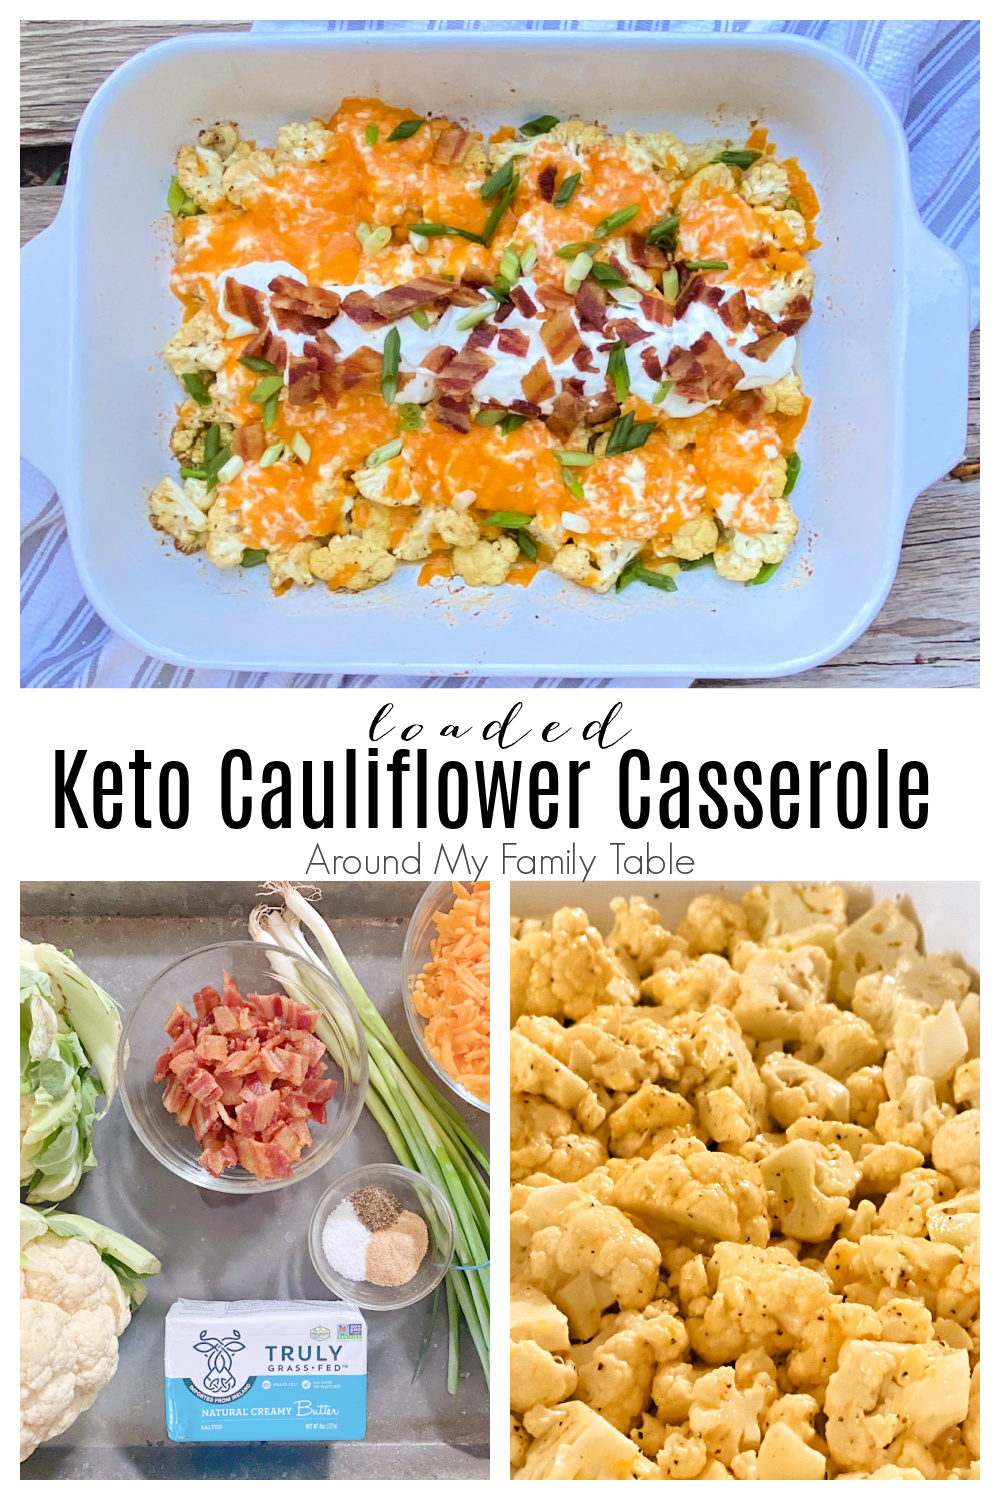 Loaded Keto Cauliflower Casserole is everything you love about a loaded potato, but with delicious healthy cauliflower. It's low in carbs and the perfect side dish for holidays or any day of the week. via @slingmama